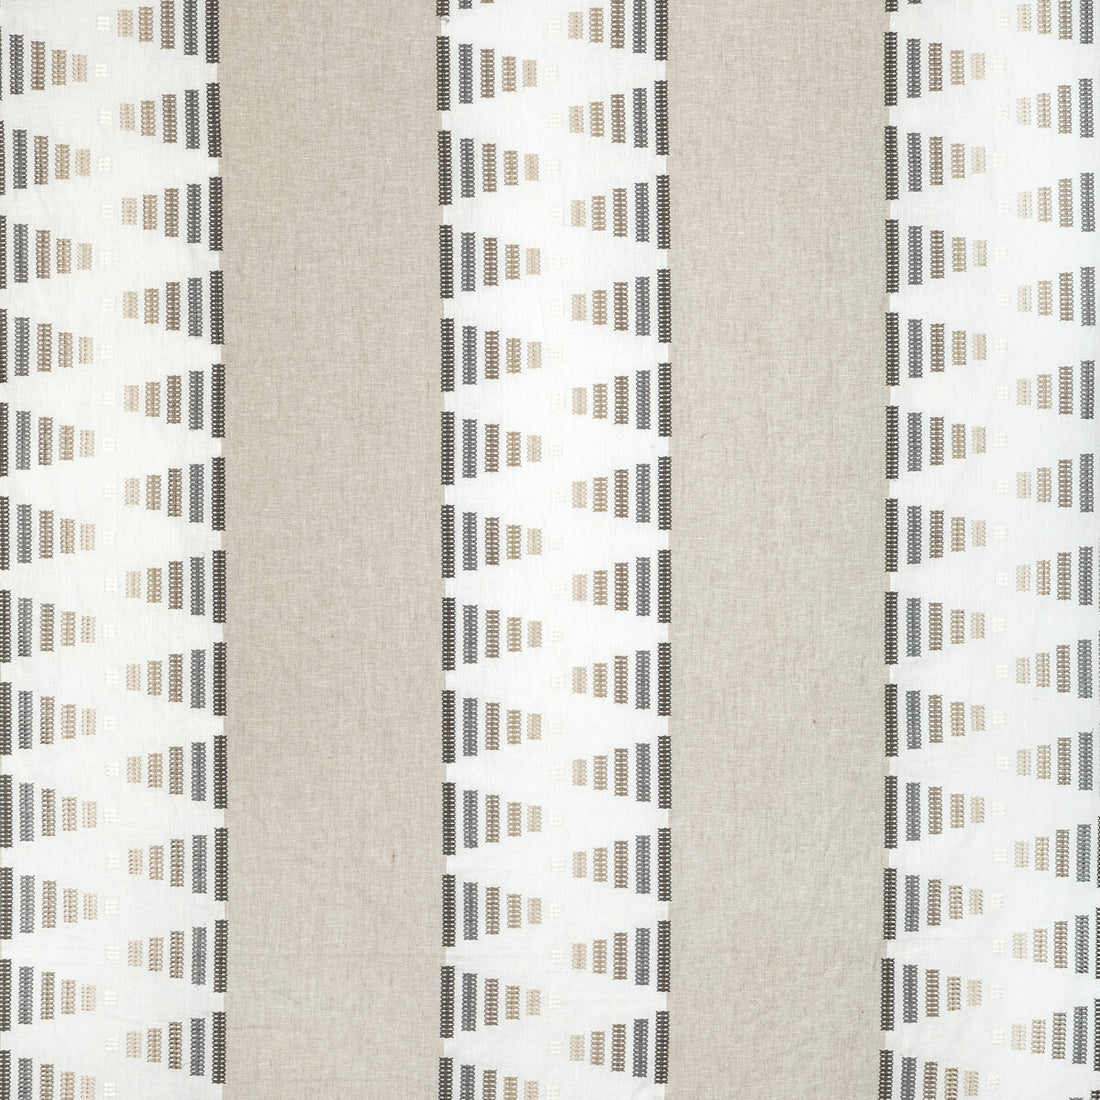 Joined Forces fabric in stone color - pattern 36353.106.0 - by Kravet Couture in the Modern Luxe III collection